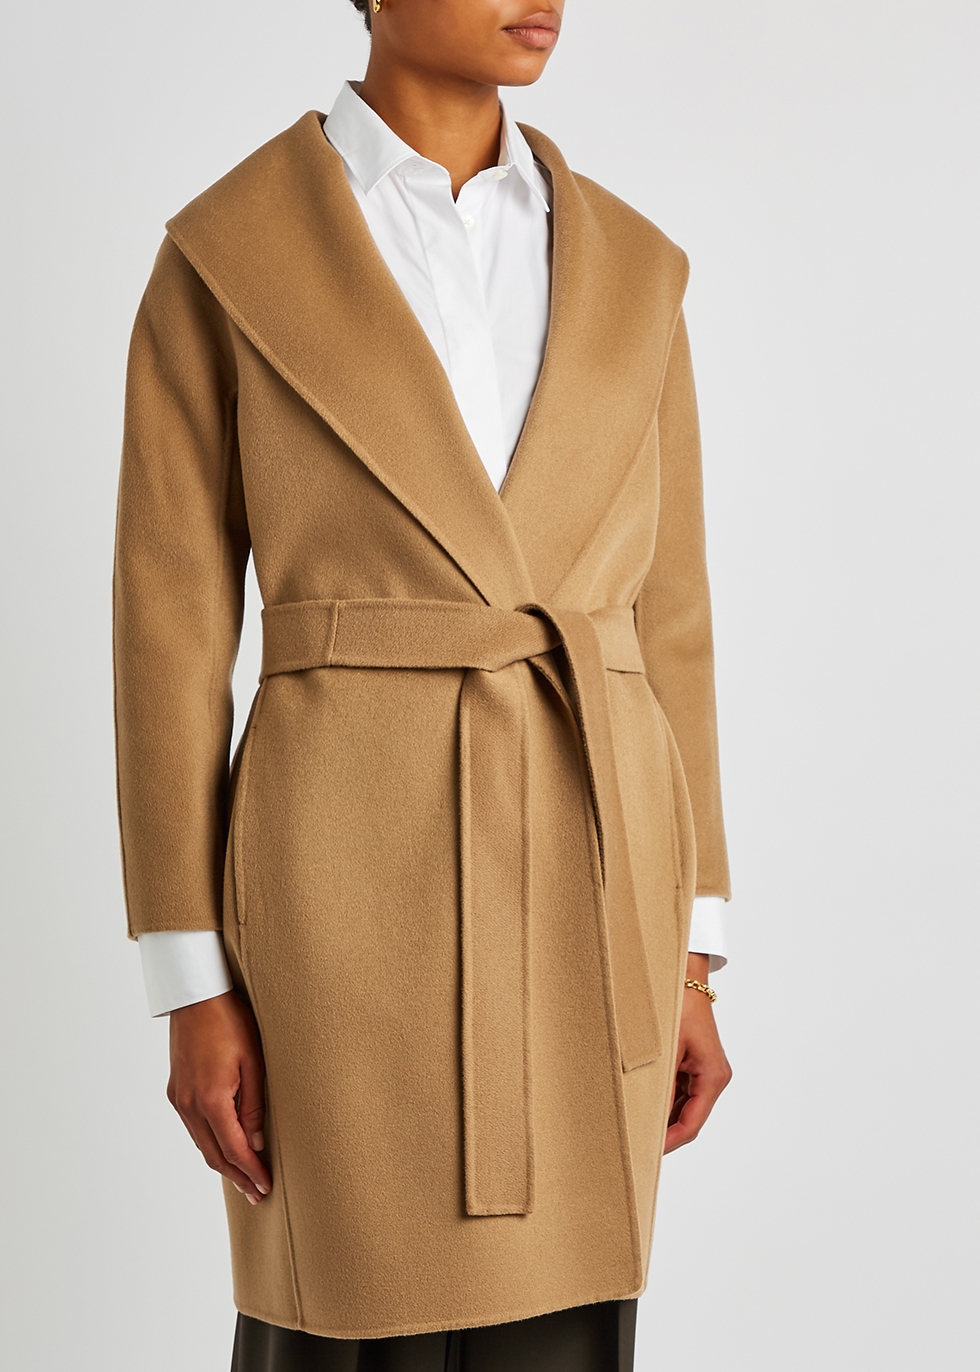 worker constantly escort jacket max mara Night Claire dynamic